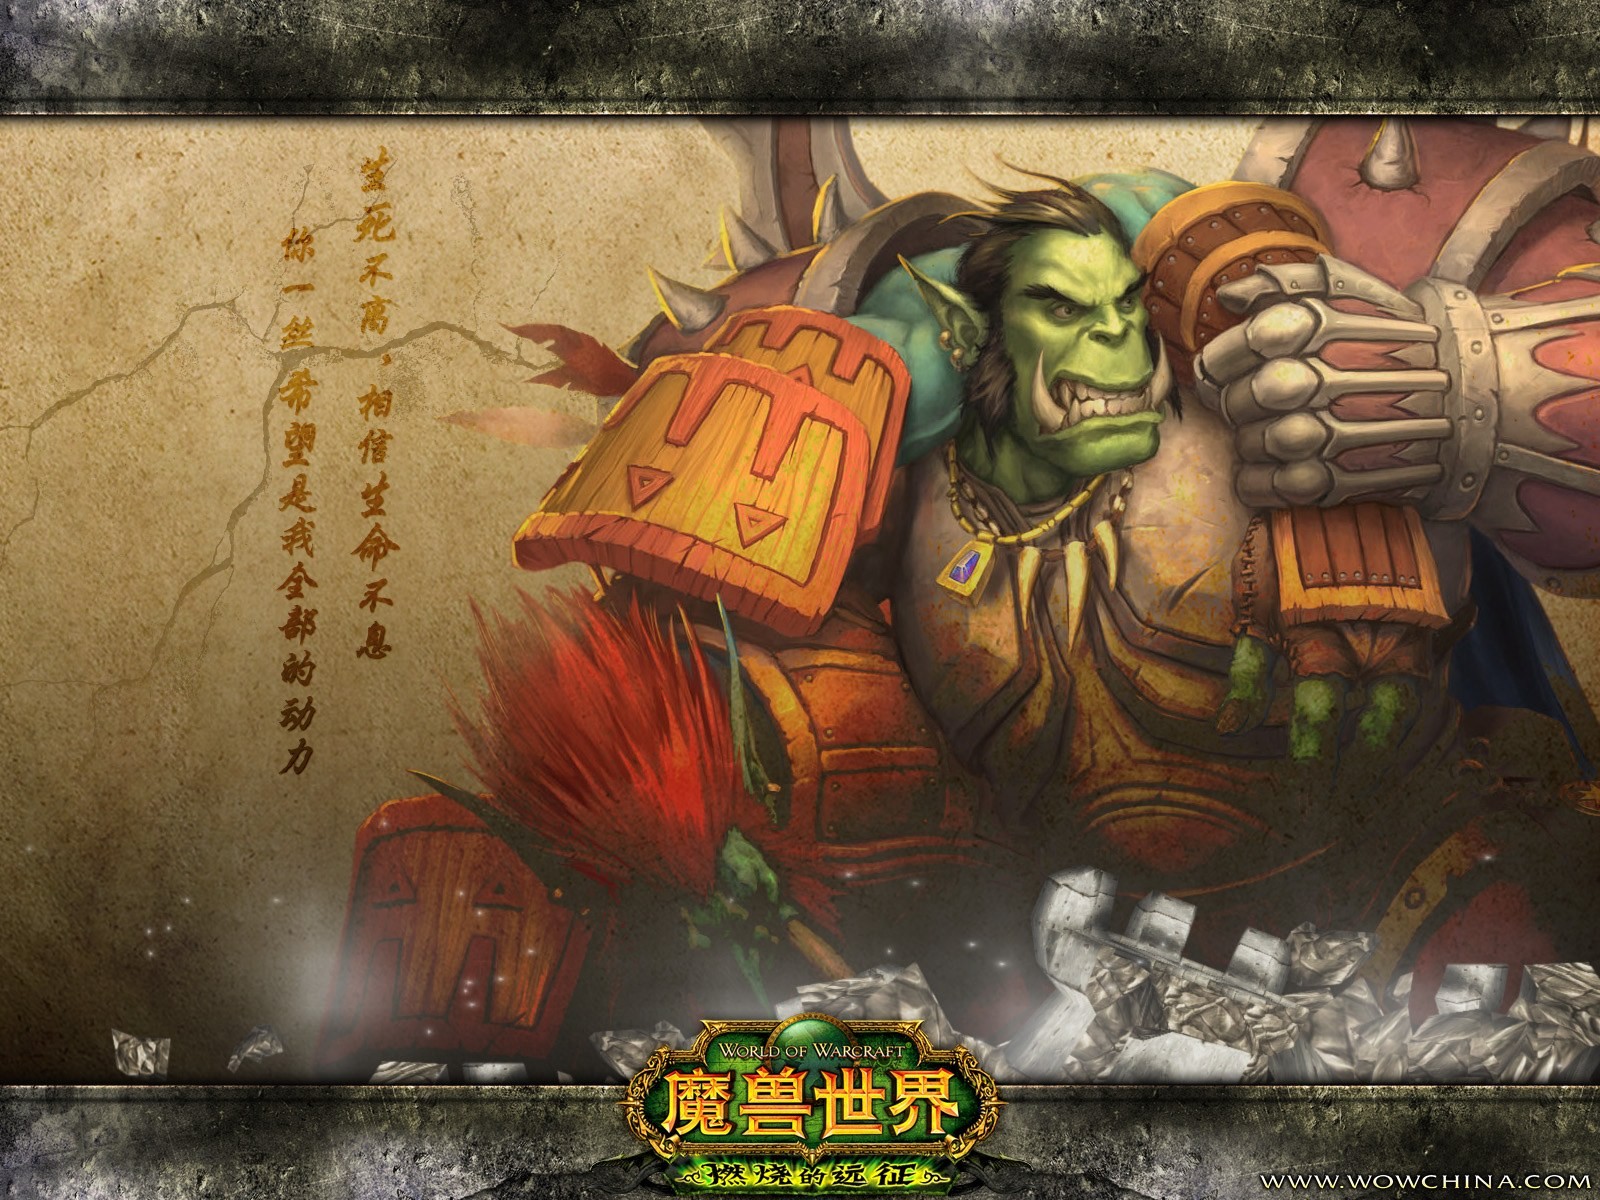 World of Warcraft: The Burning Crusade's official wallpaper (2) #20 - 1600x1200